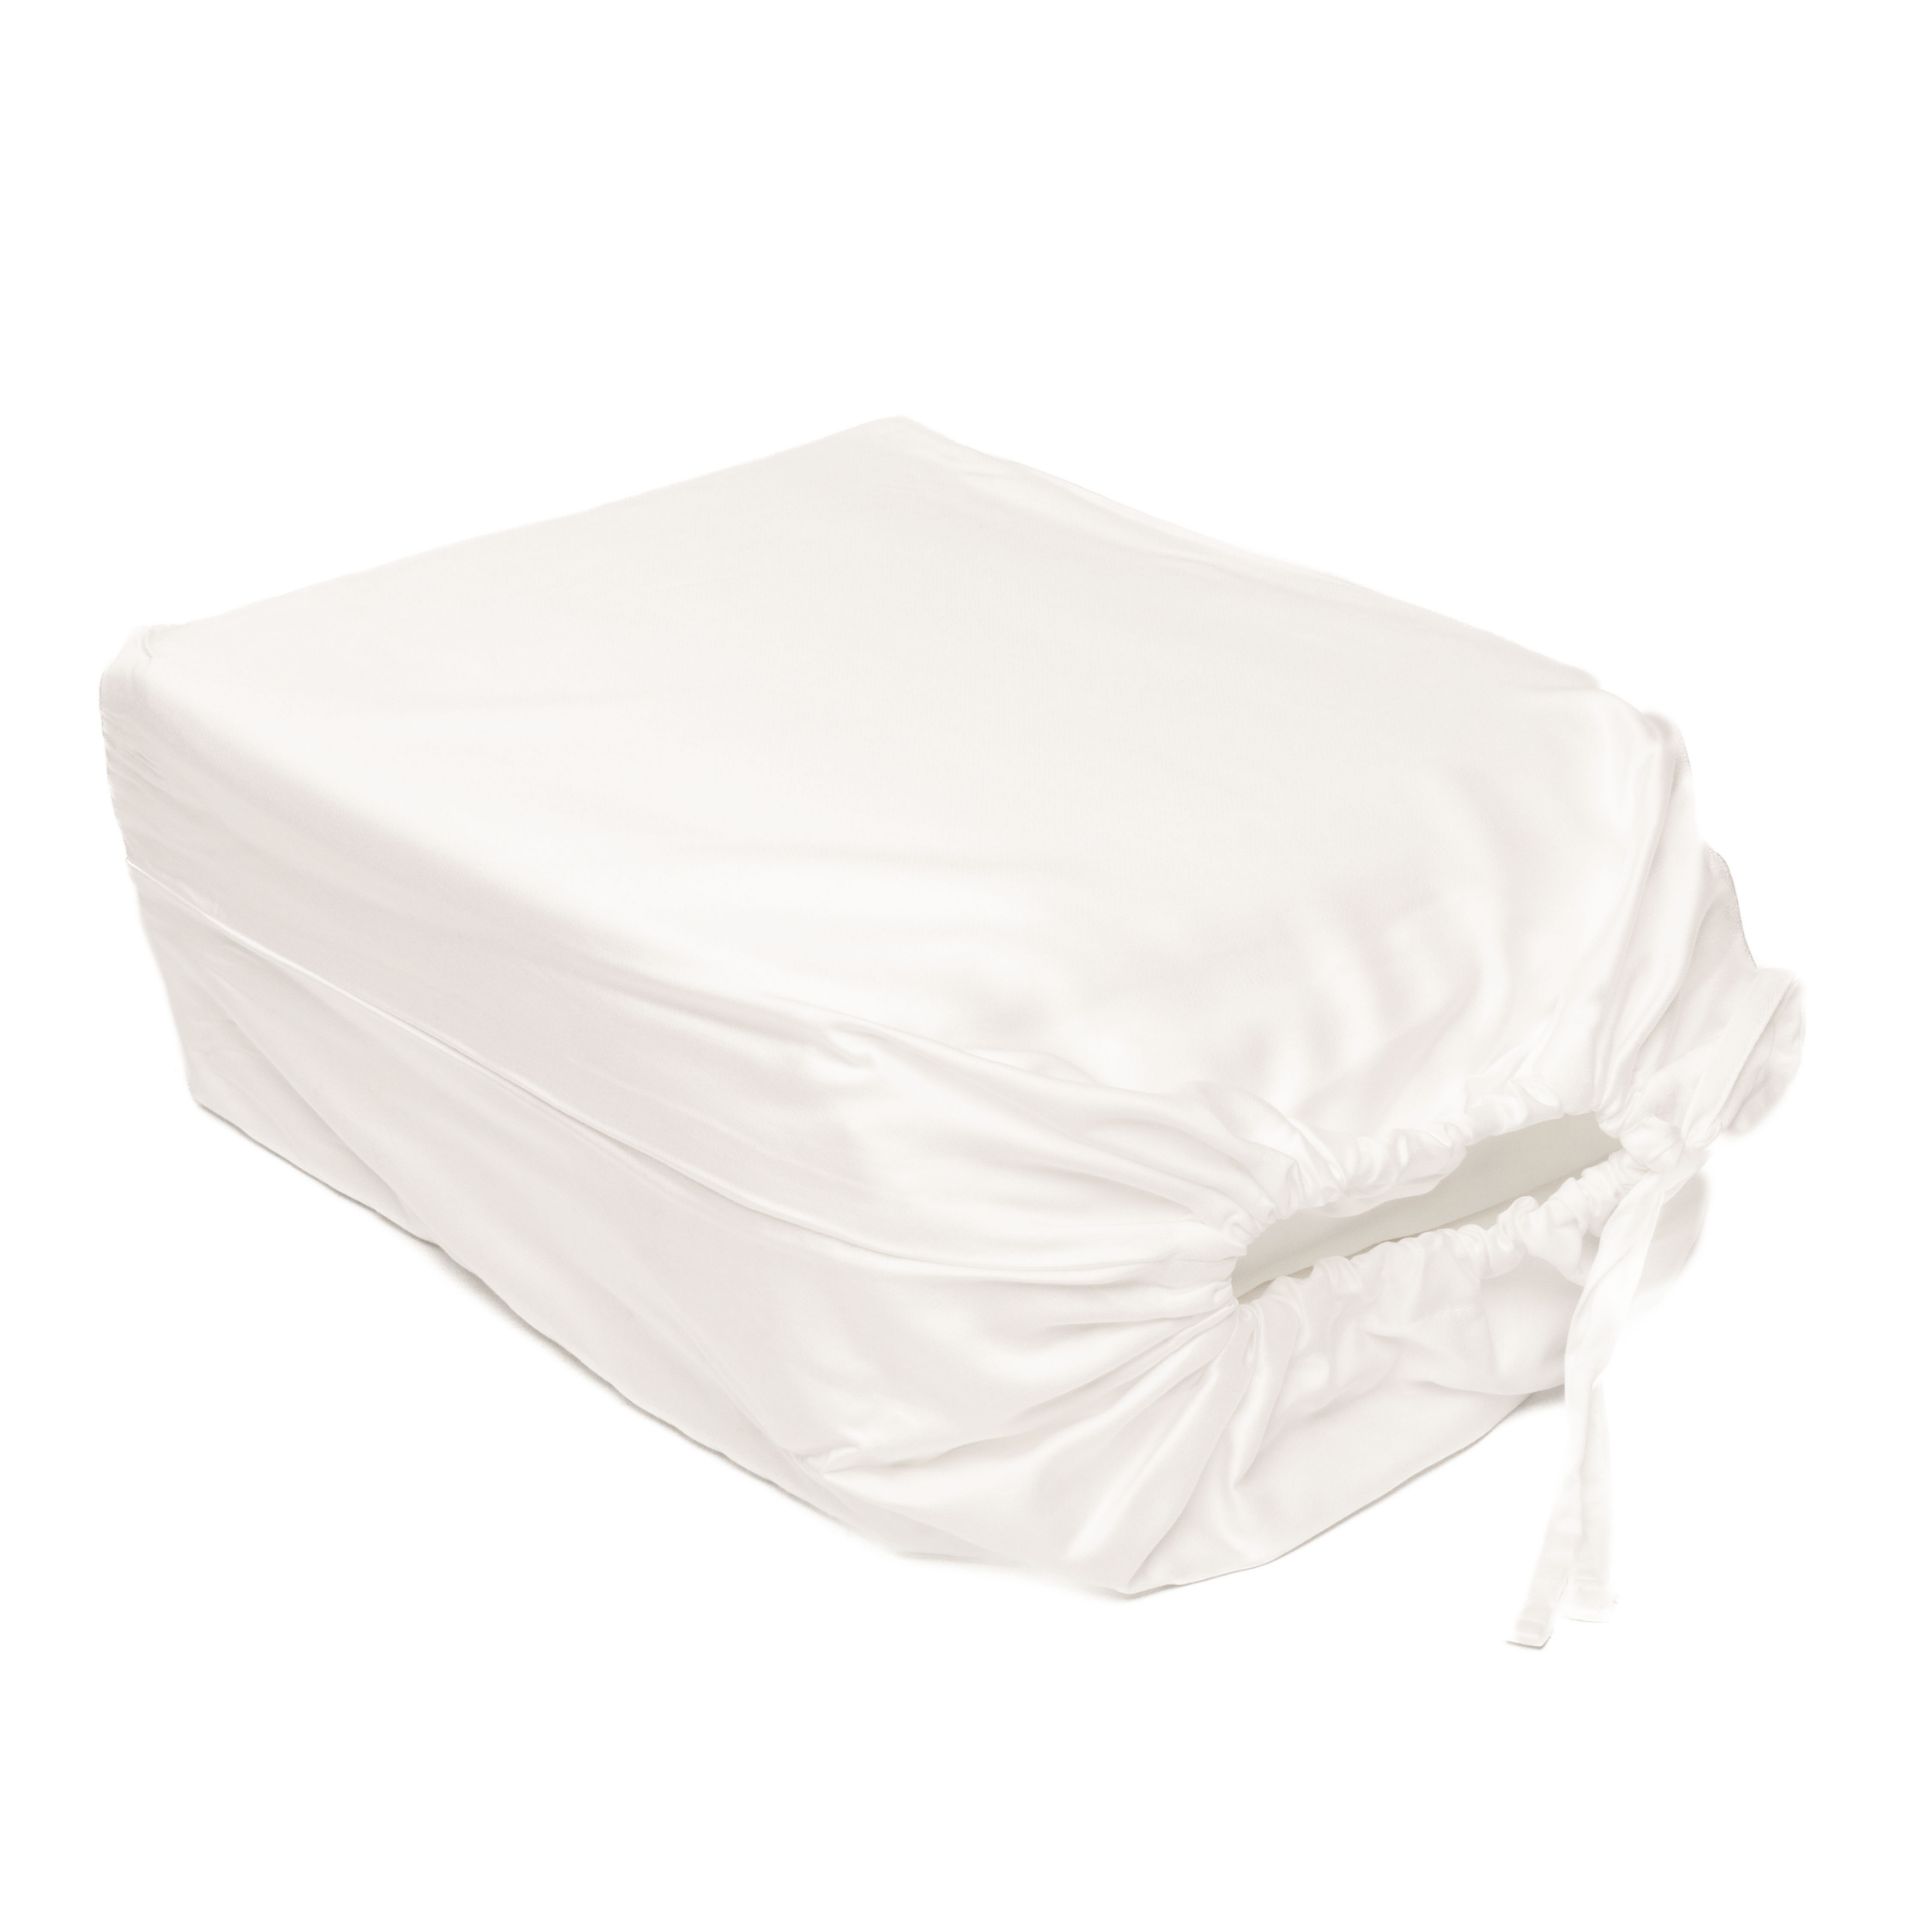 6 x White Bamboo Bed Linen Set (Double) - Duvet Cover, Fitted Sheet, Flat Sheet, 2 Pillowcases - Image 8 of 9